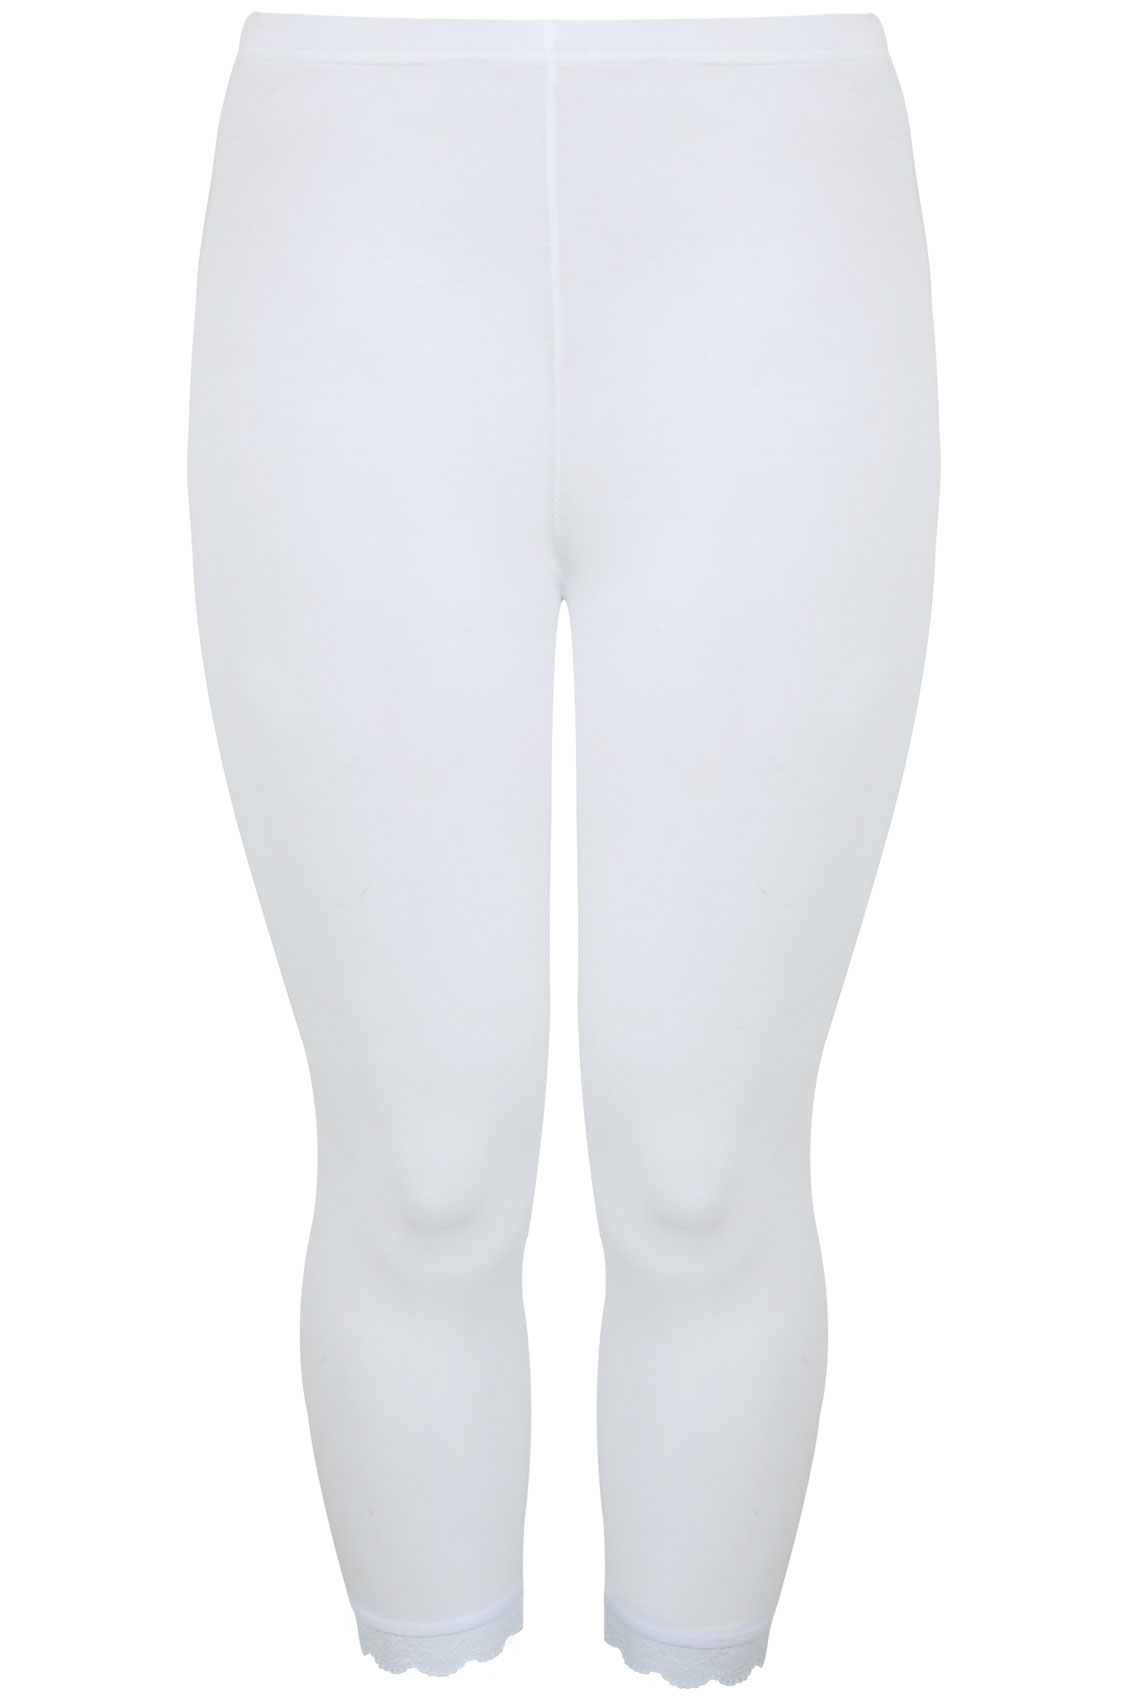 White Cotton Essential Cropped Leggings With Lace Detail Plus Size 16 to 32